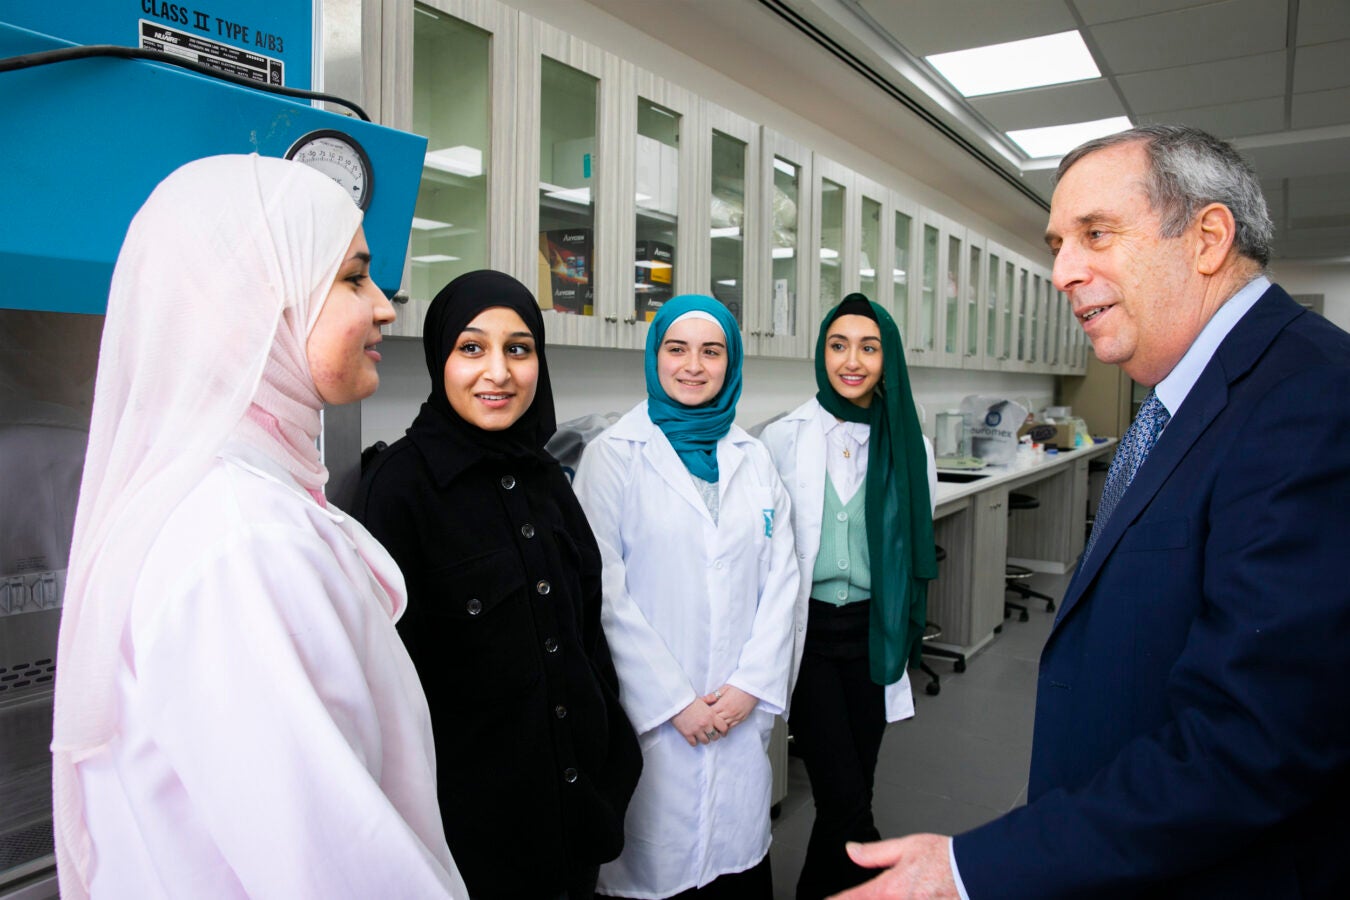 President Larry Bacow visits the West Bank and Al-Quds University on the Abu Dis Campus. Bisan Safi (from left), Munira Odetallah, Yasmin Attili, and Hana Shkirat speak with Bacow during his tour of the campus.